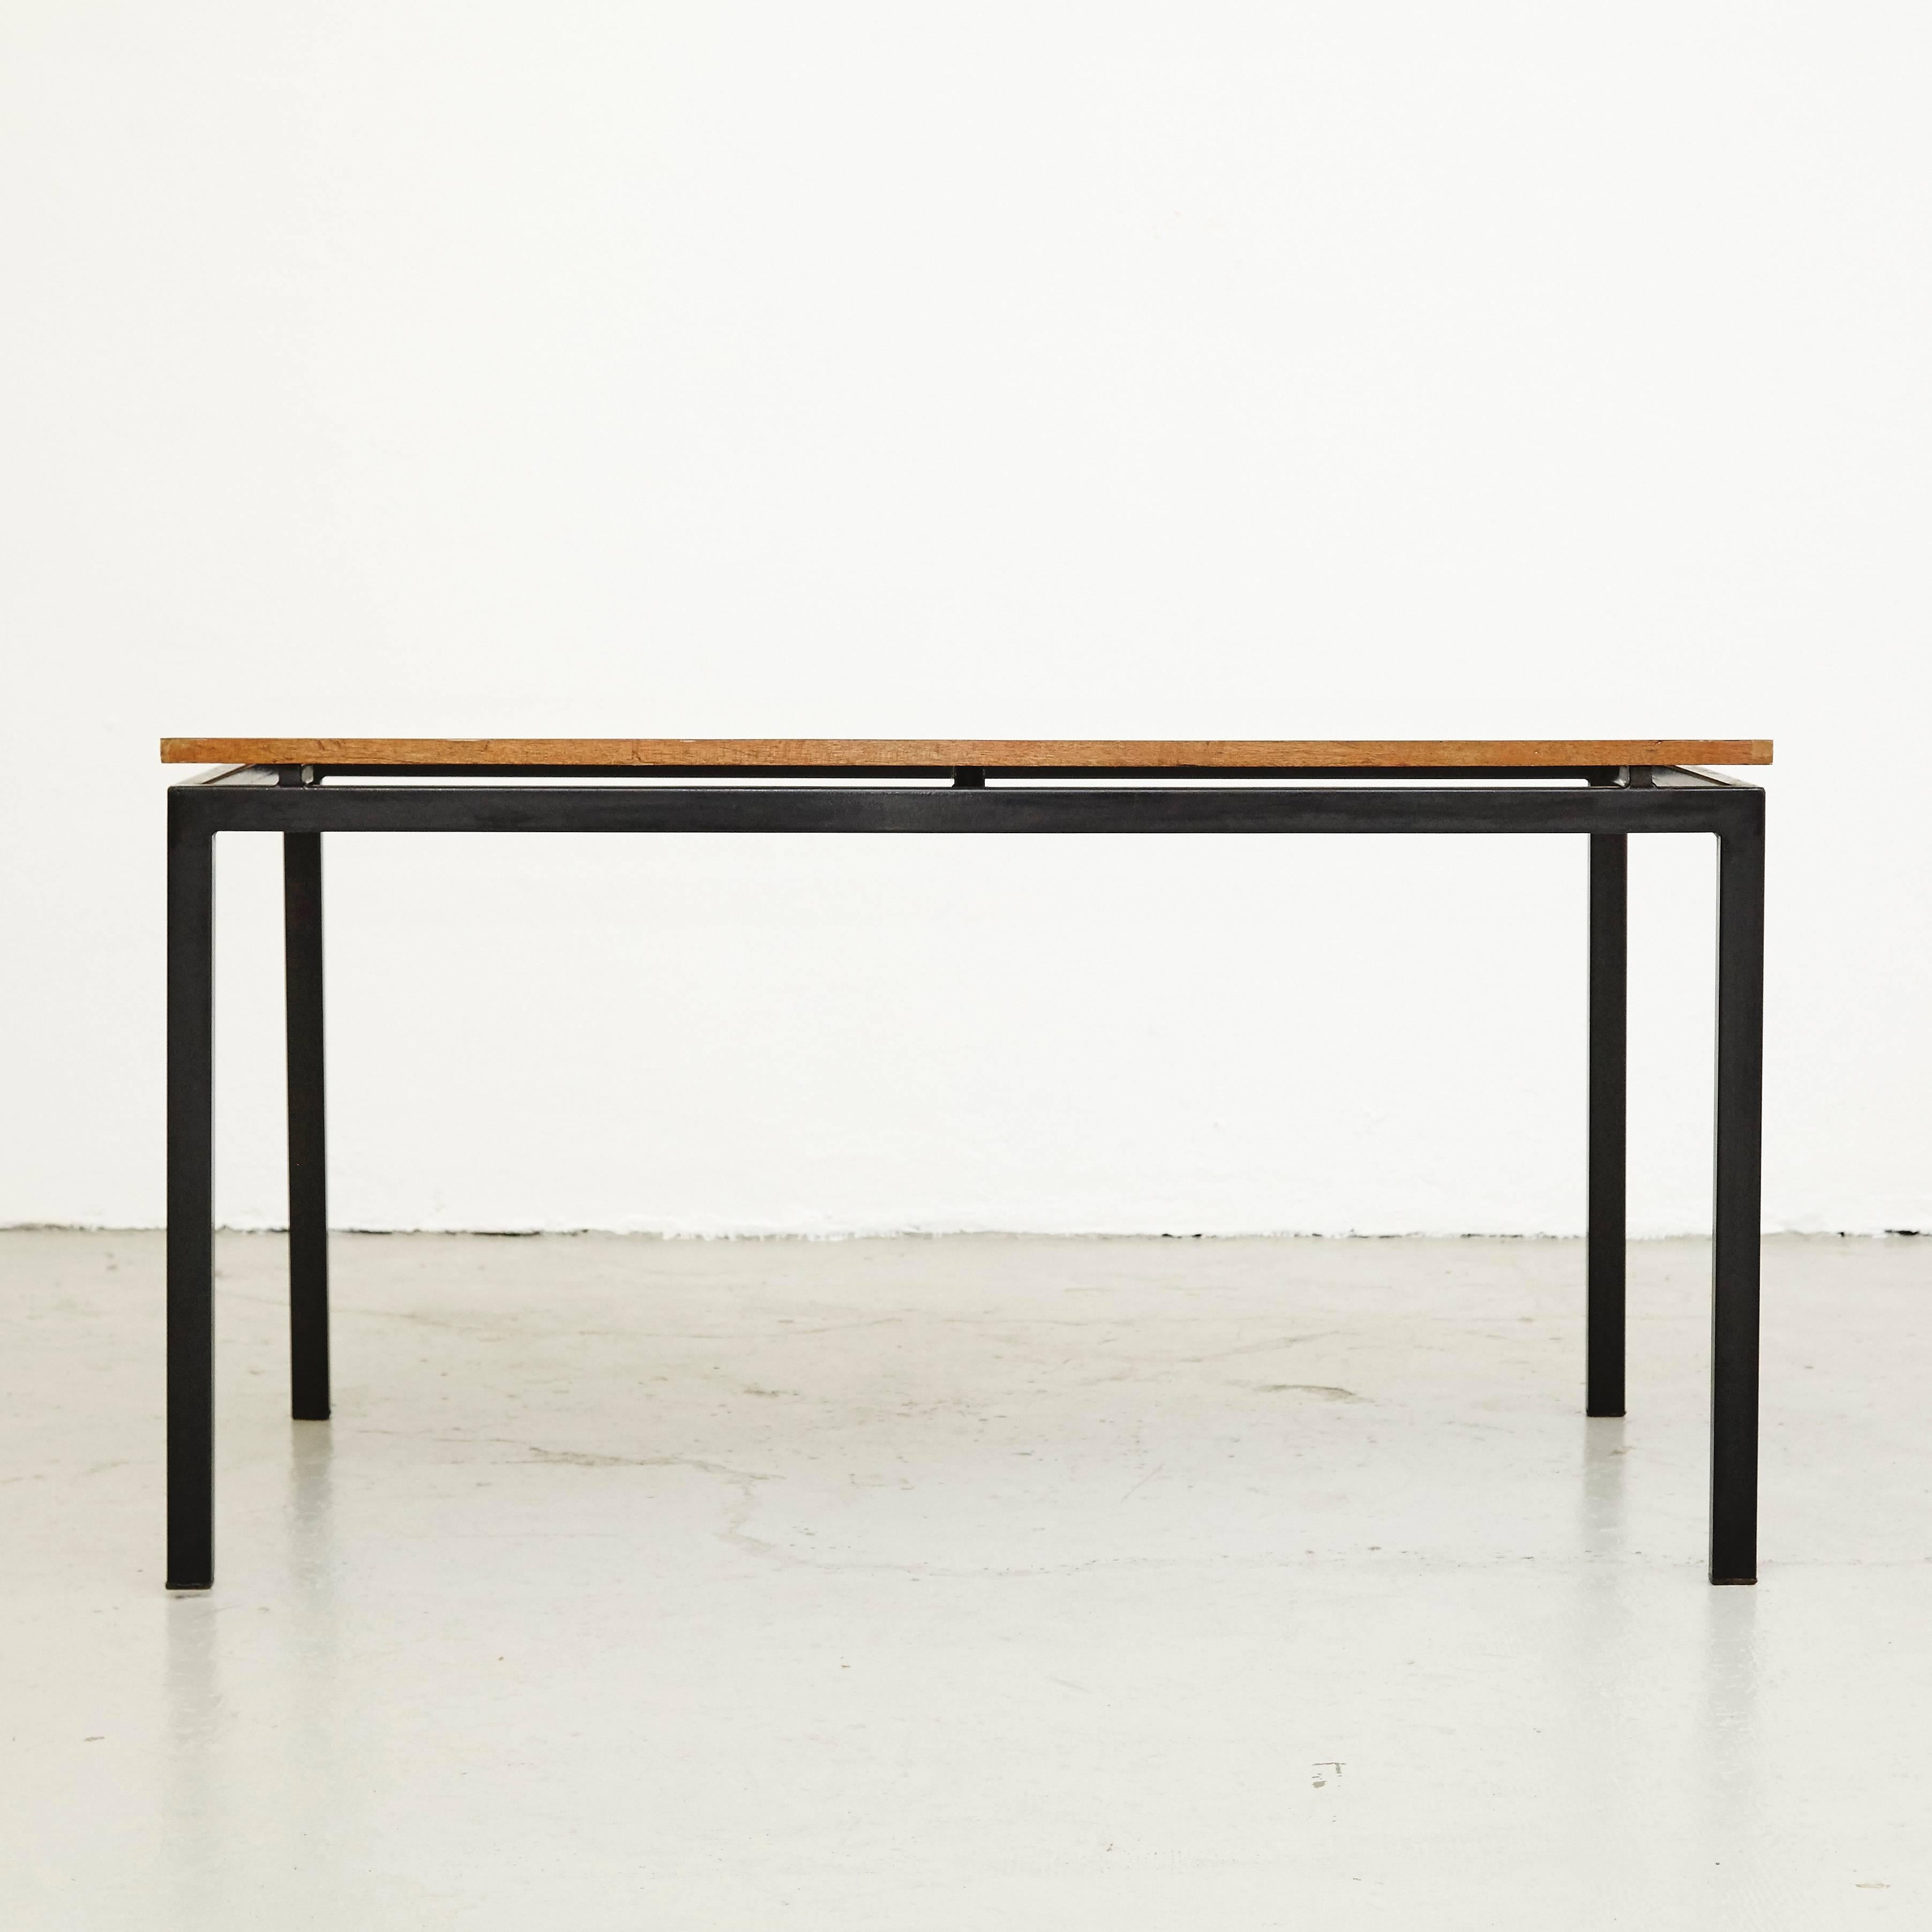 Table designed by Charlotte Perriand, circa 1950.

Wood, metal frame legs.

Provenance: Cansado, Mauritania (Africa).

In good original condition, with minor wear consistent with age and use, preserving a beautiful patina. 

Charlotte